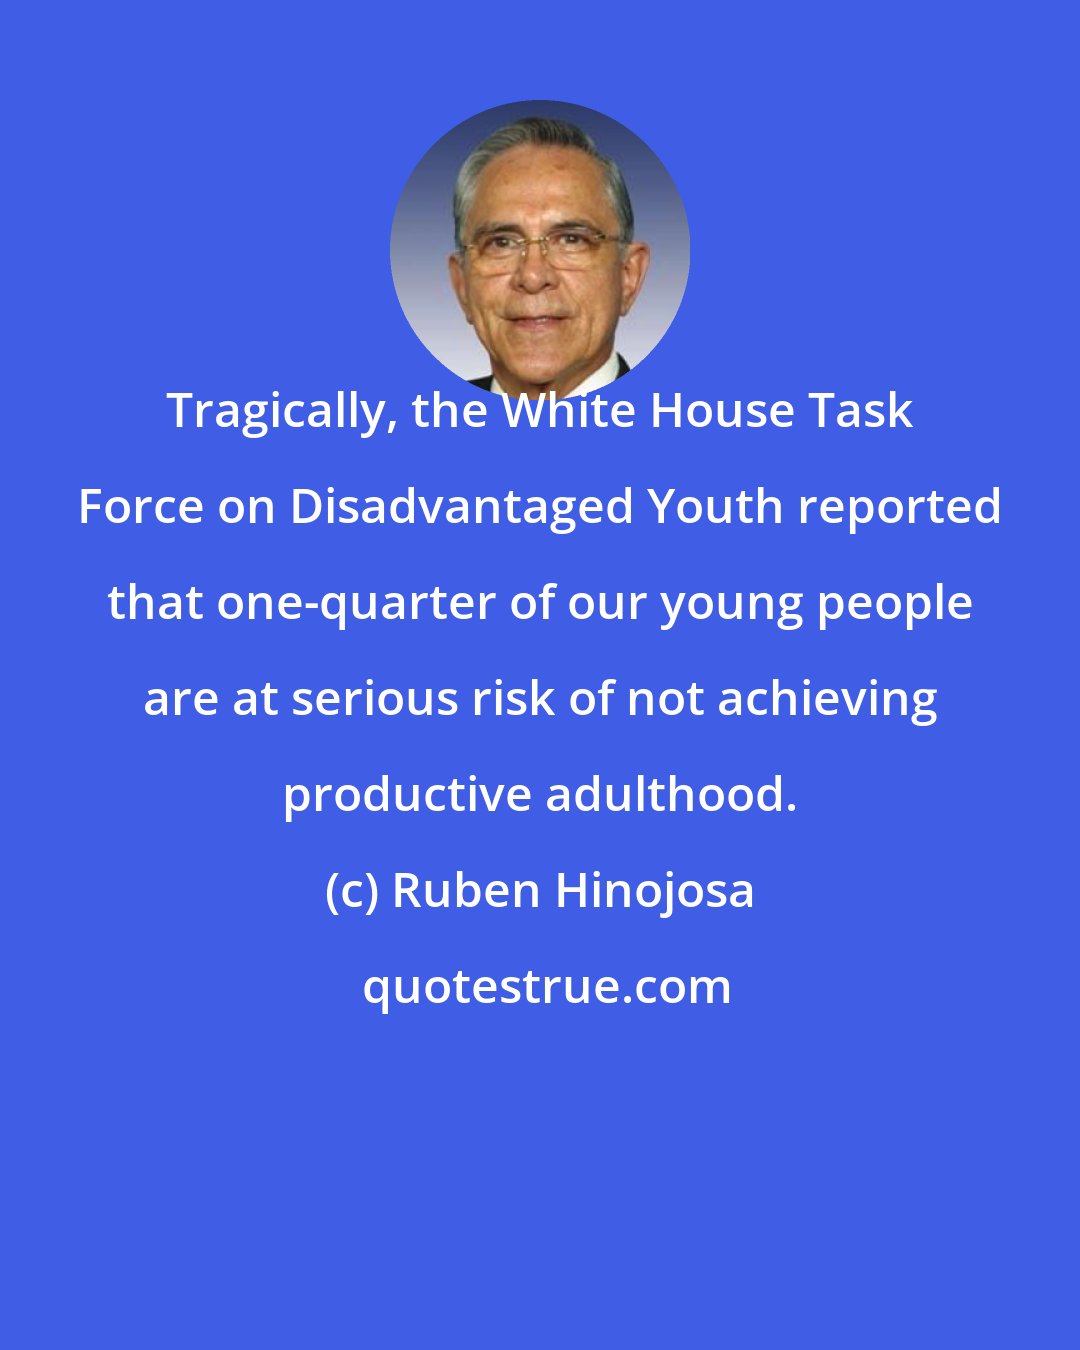 Ruben Hinojosa: Tragically, the White House Task Force on Disadvantaged Youth reported that one-quarter of our young people are at serious risk of not achieving productive adulthood.